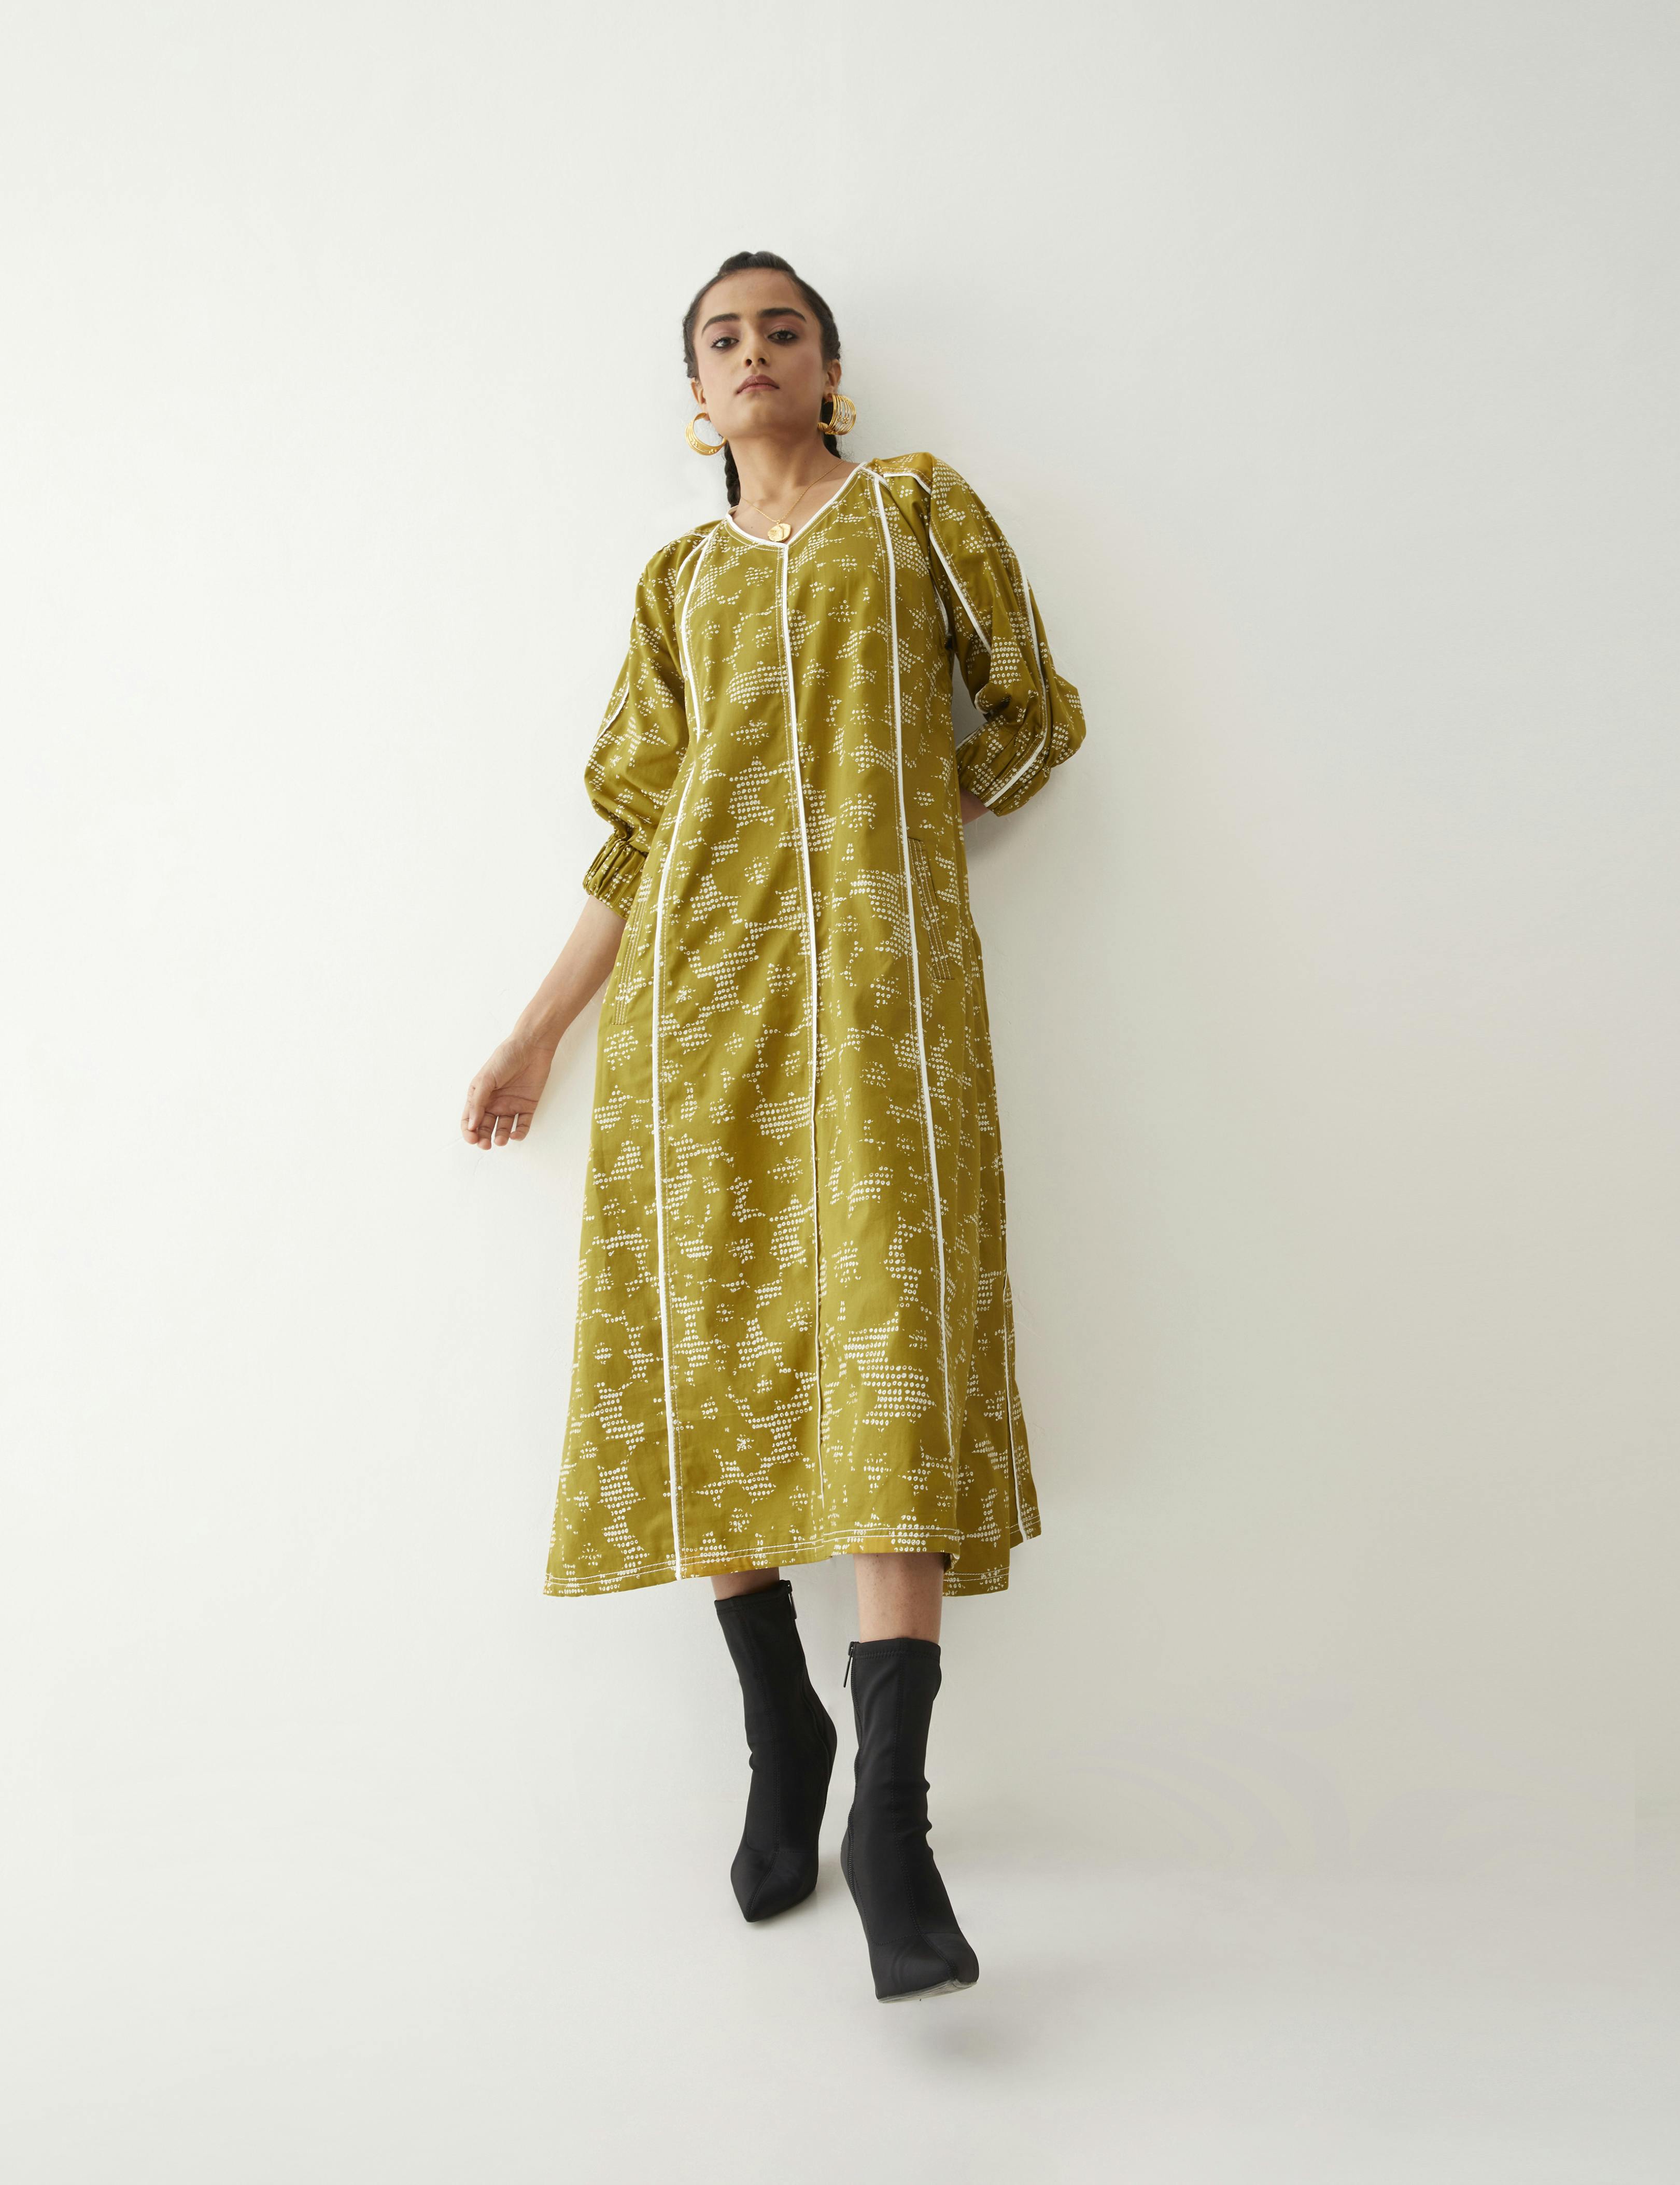 FRIDA Dress, a product by Son of a Noble